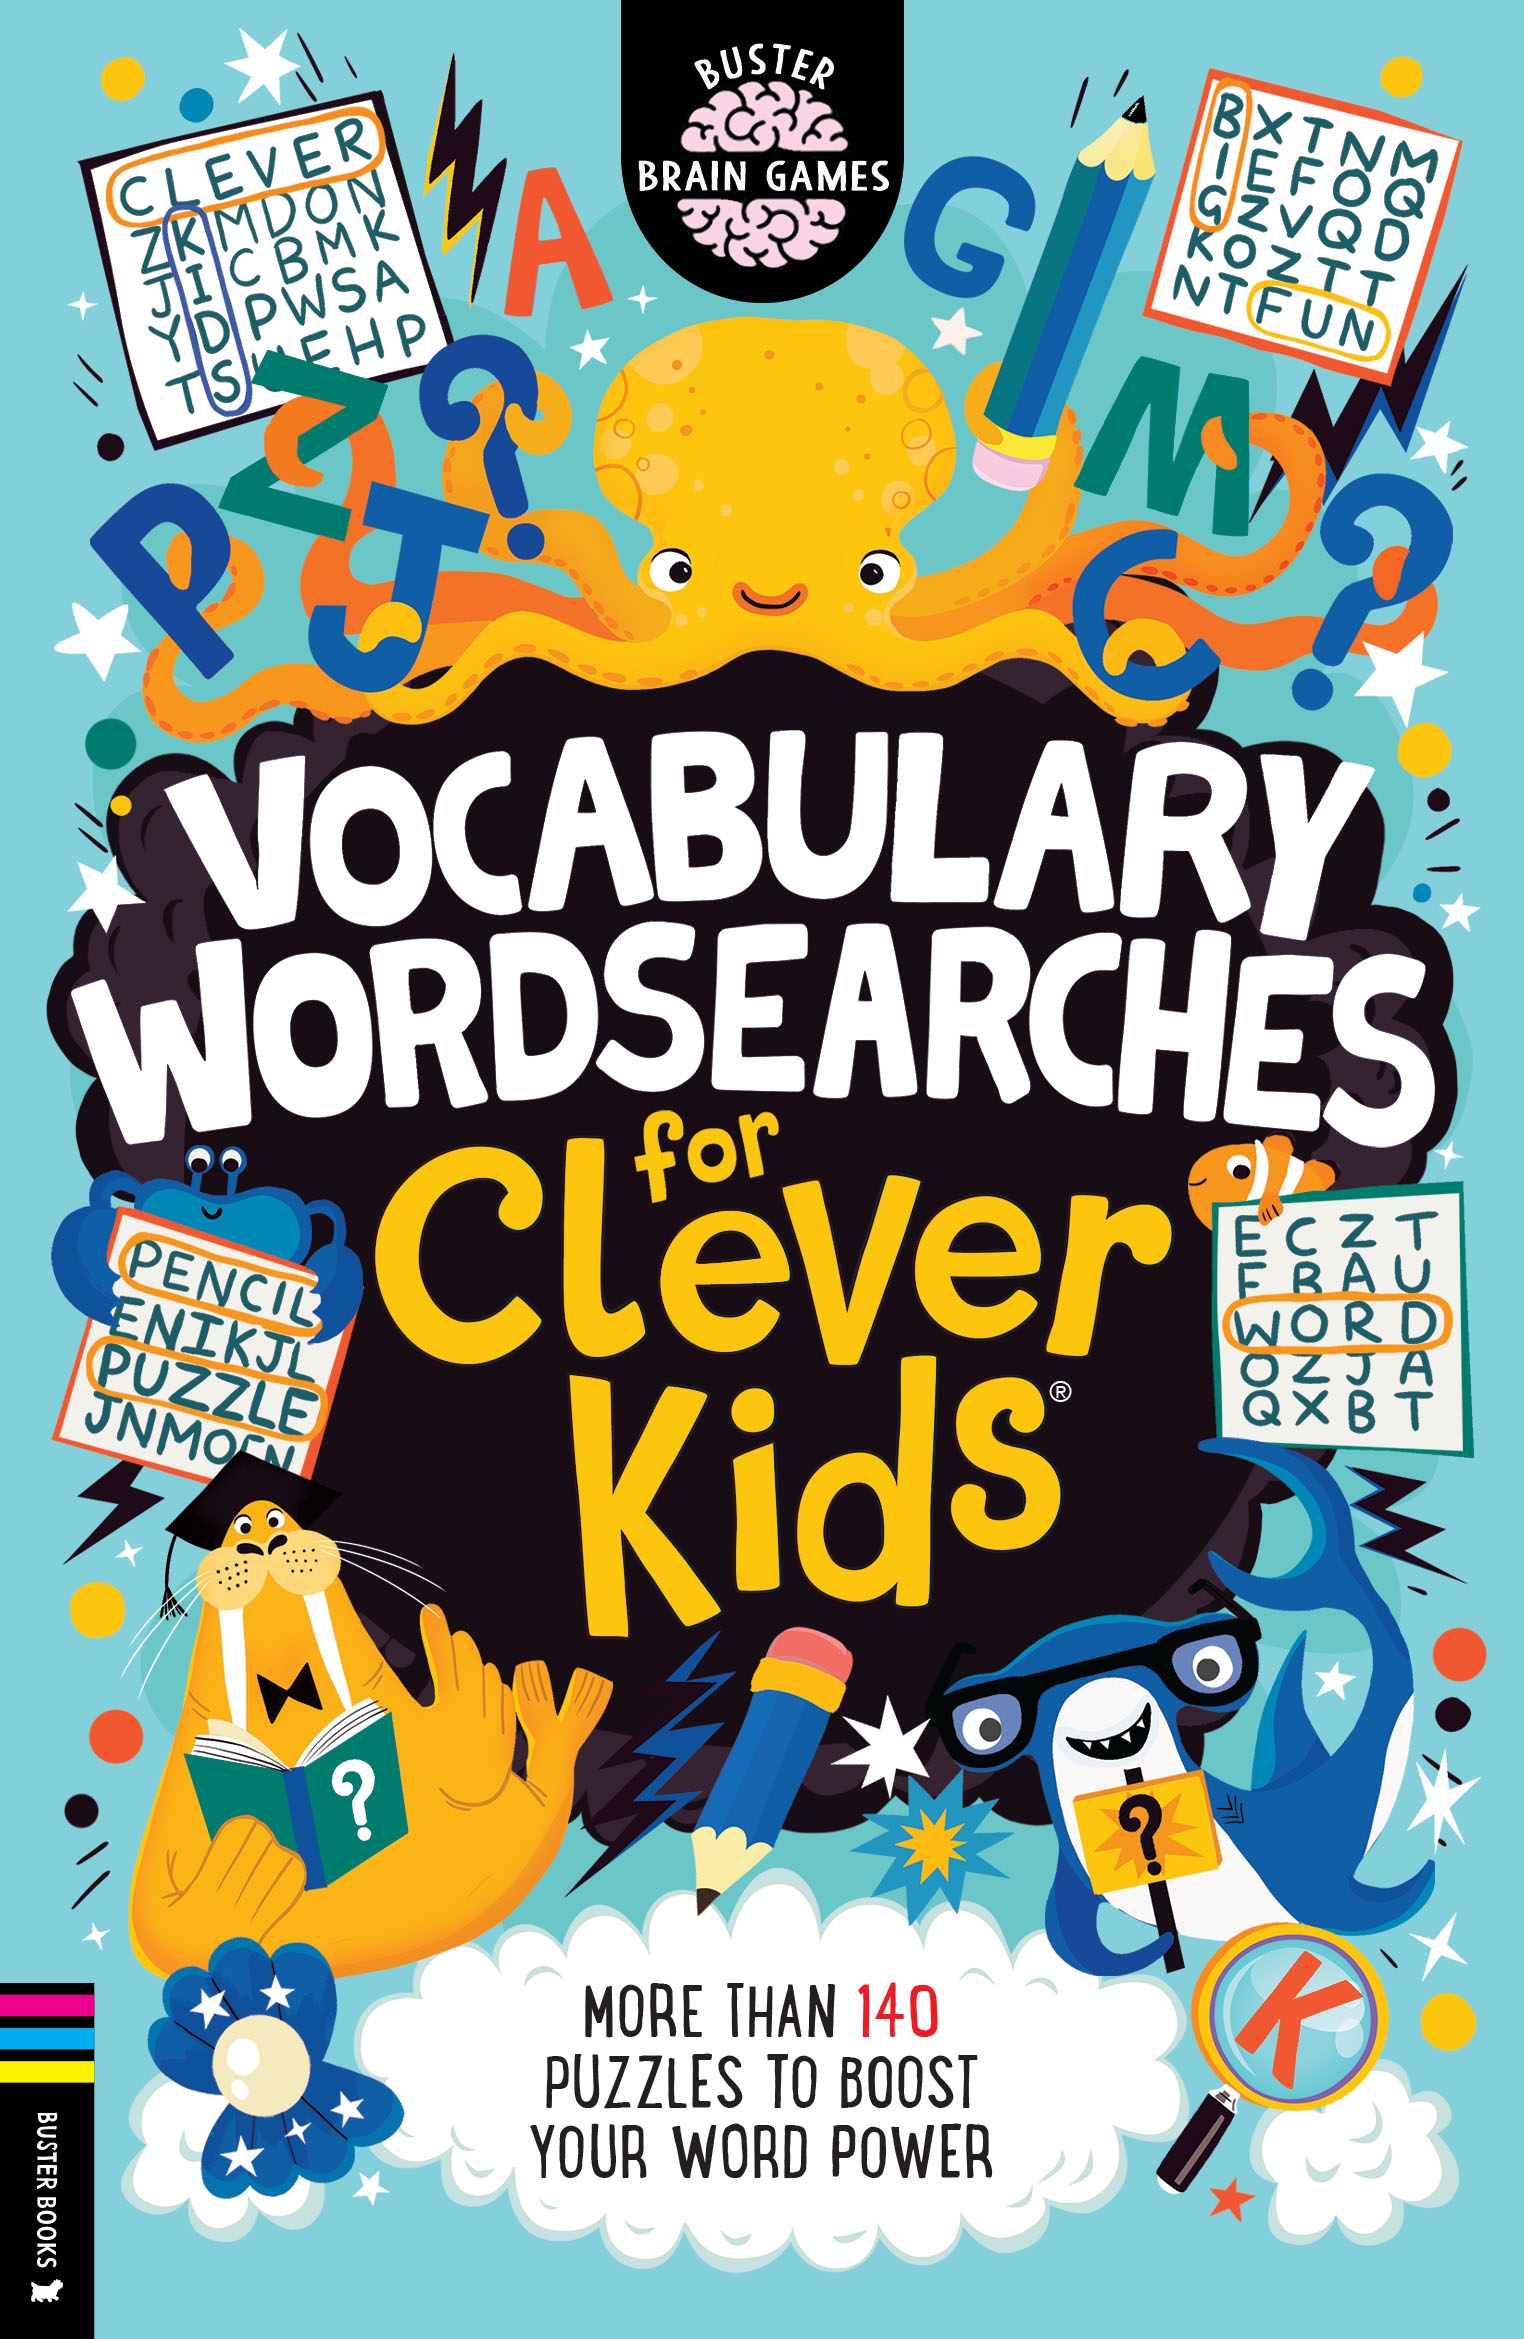 Vocabulary Wordsearches for Clever Kids®